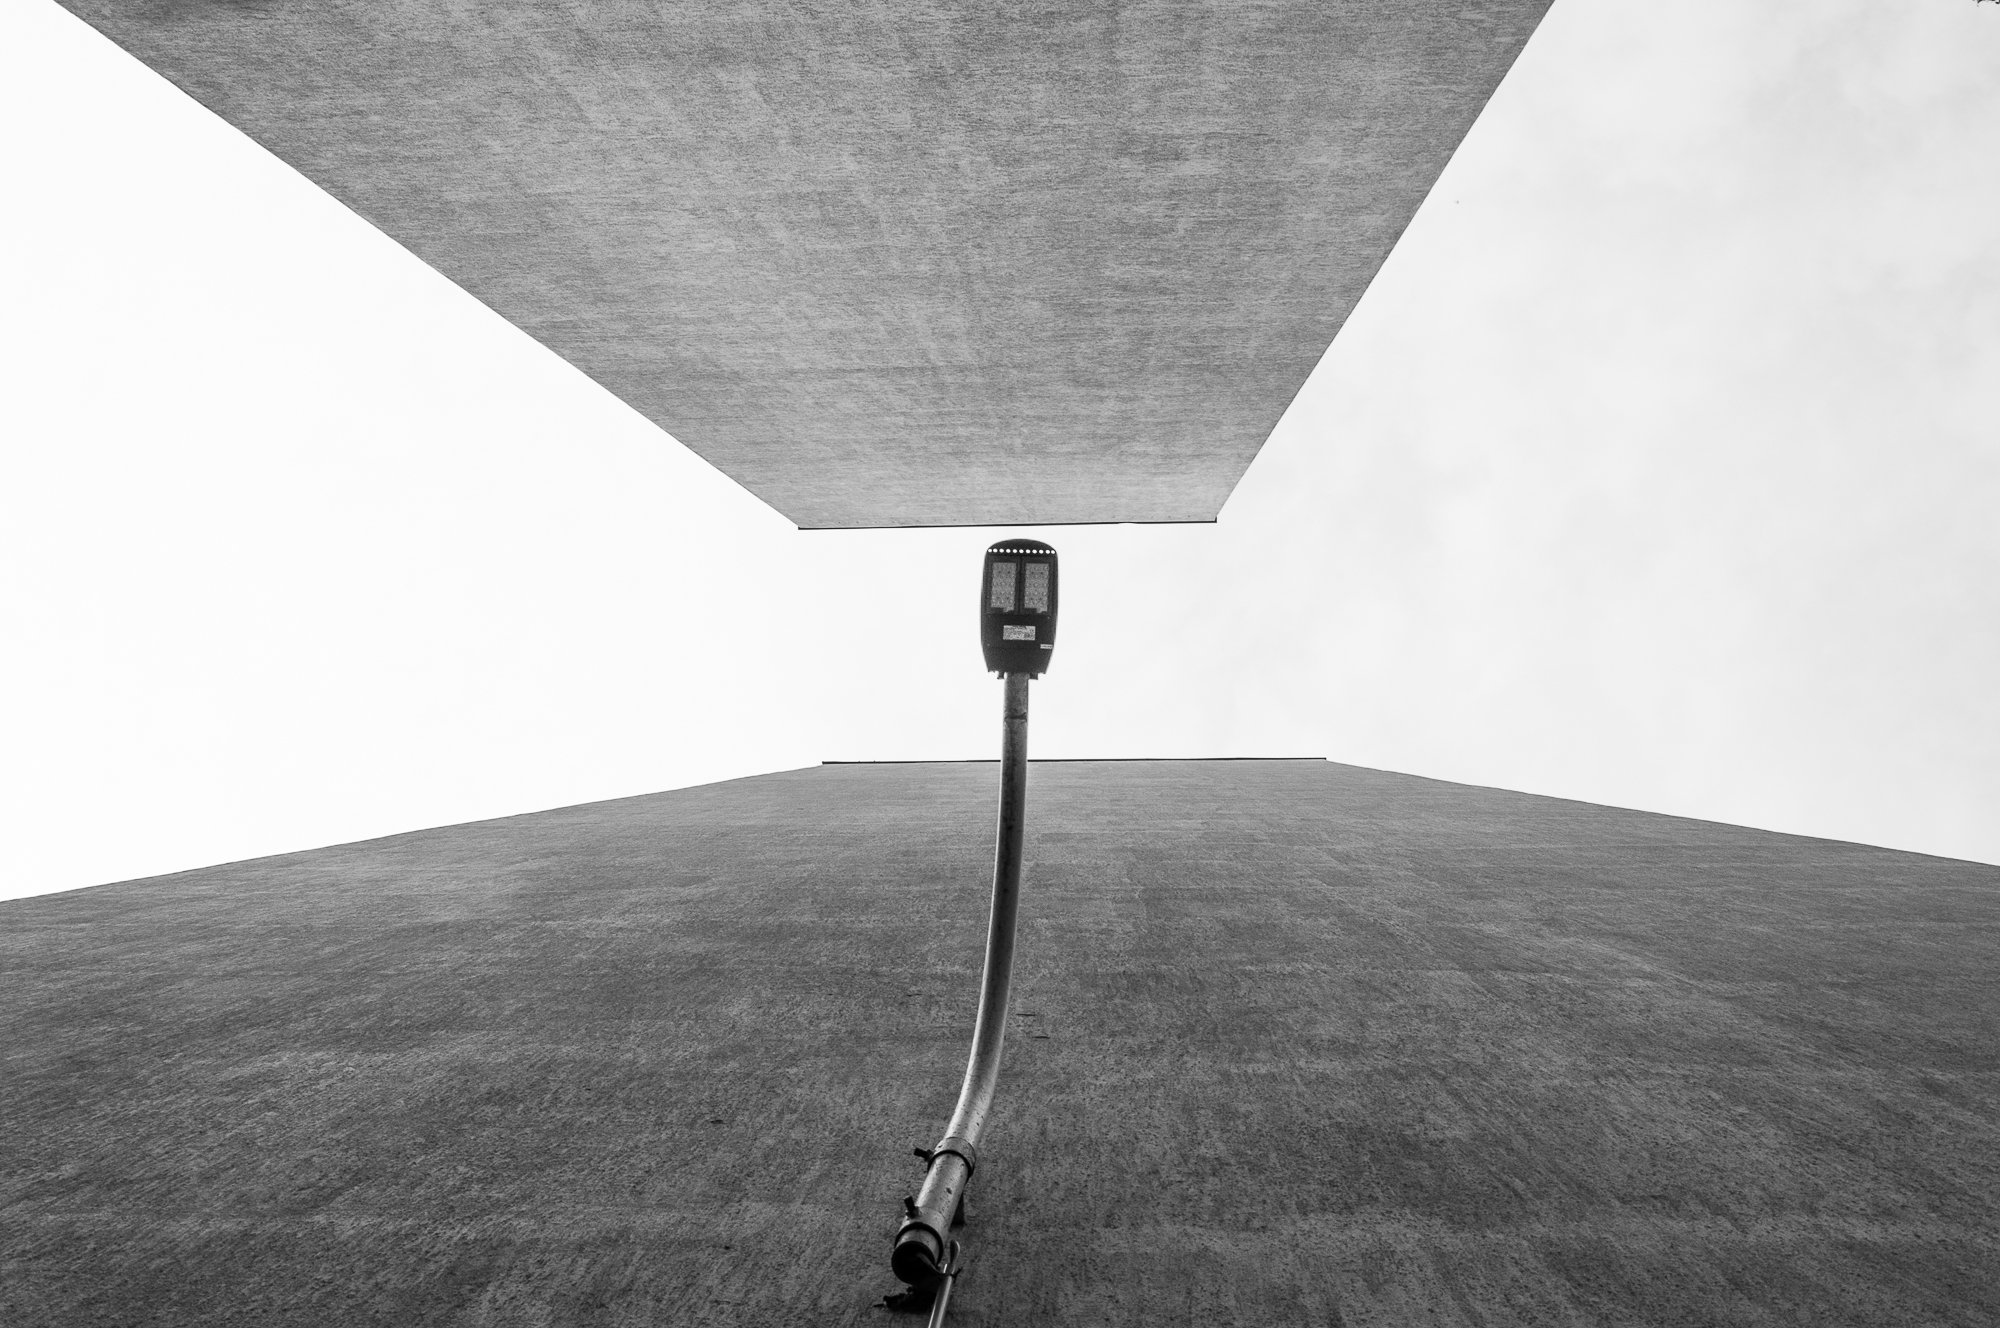 Adam Mazek Photography Warsaw (Warszawa) 2019. Post: "How to manage your time efficiently?" Perspective. Street lamp. Geometry. Minimalism.